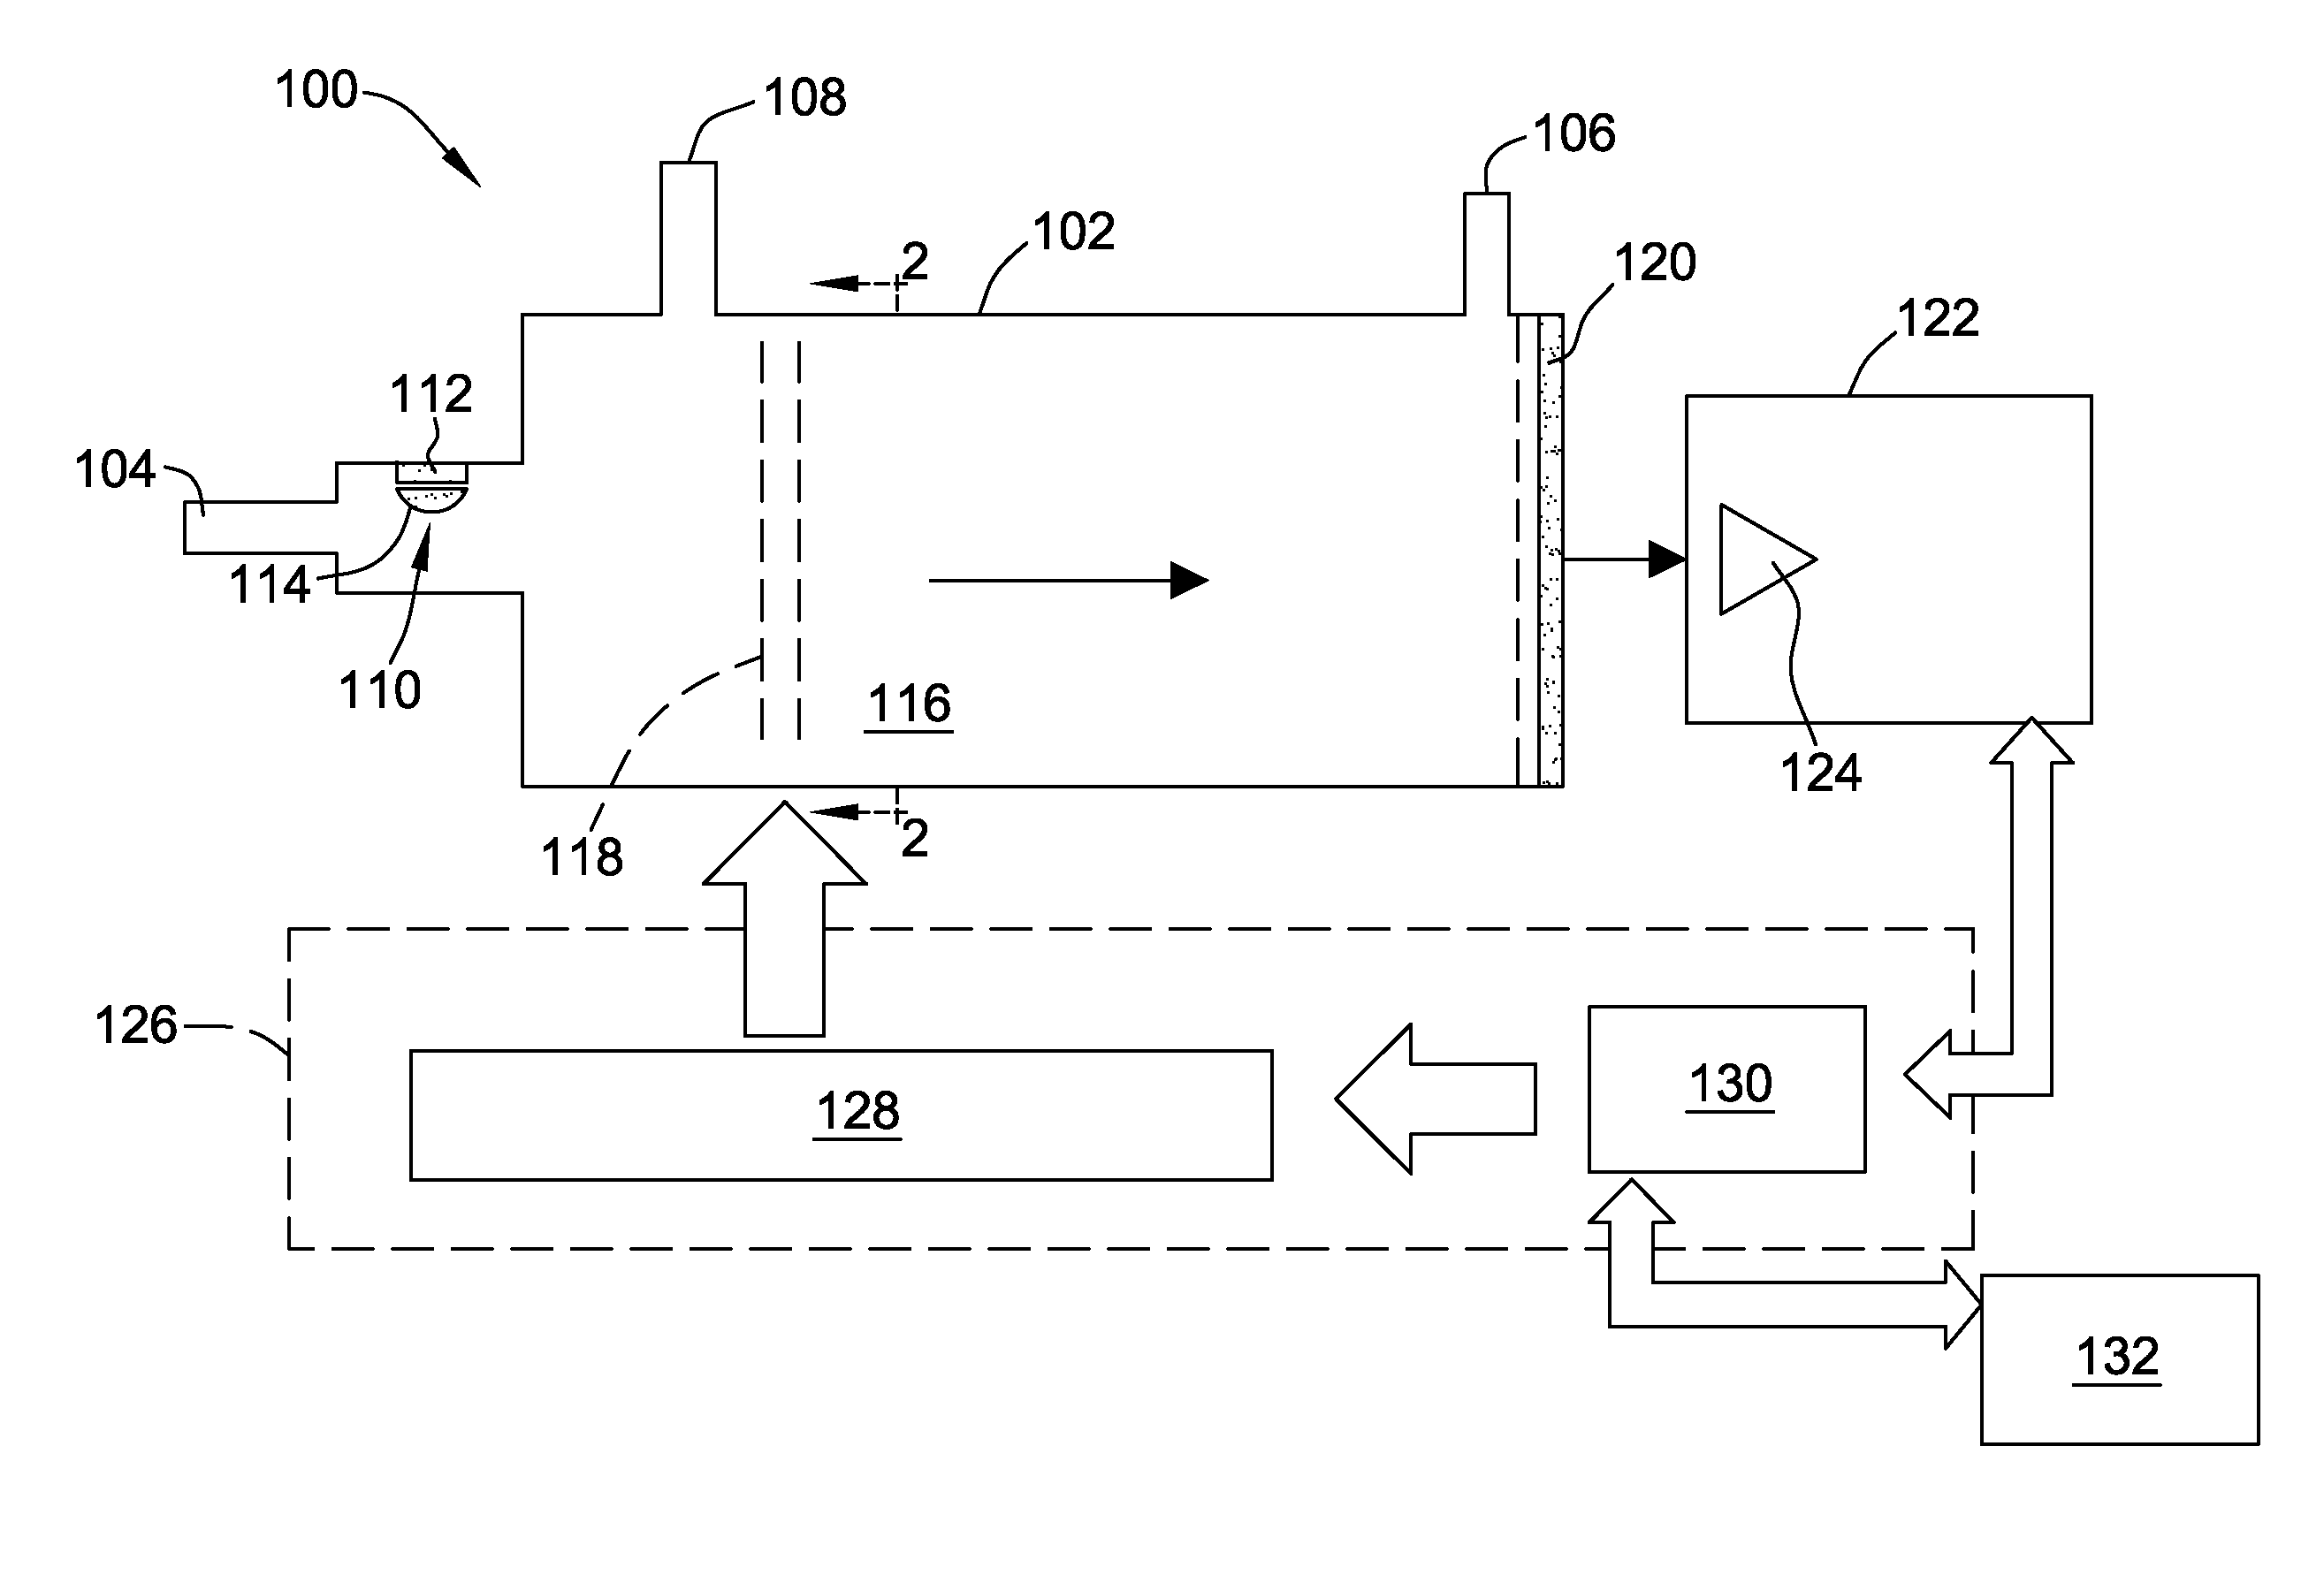 Ion mobility spectrometer and method of using the same